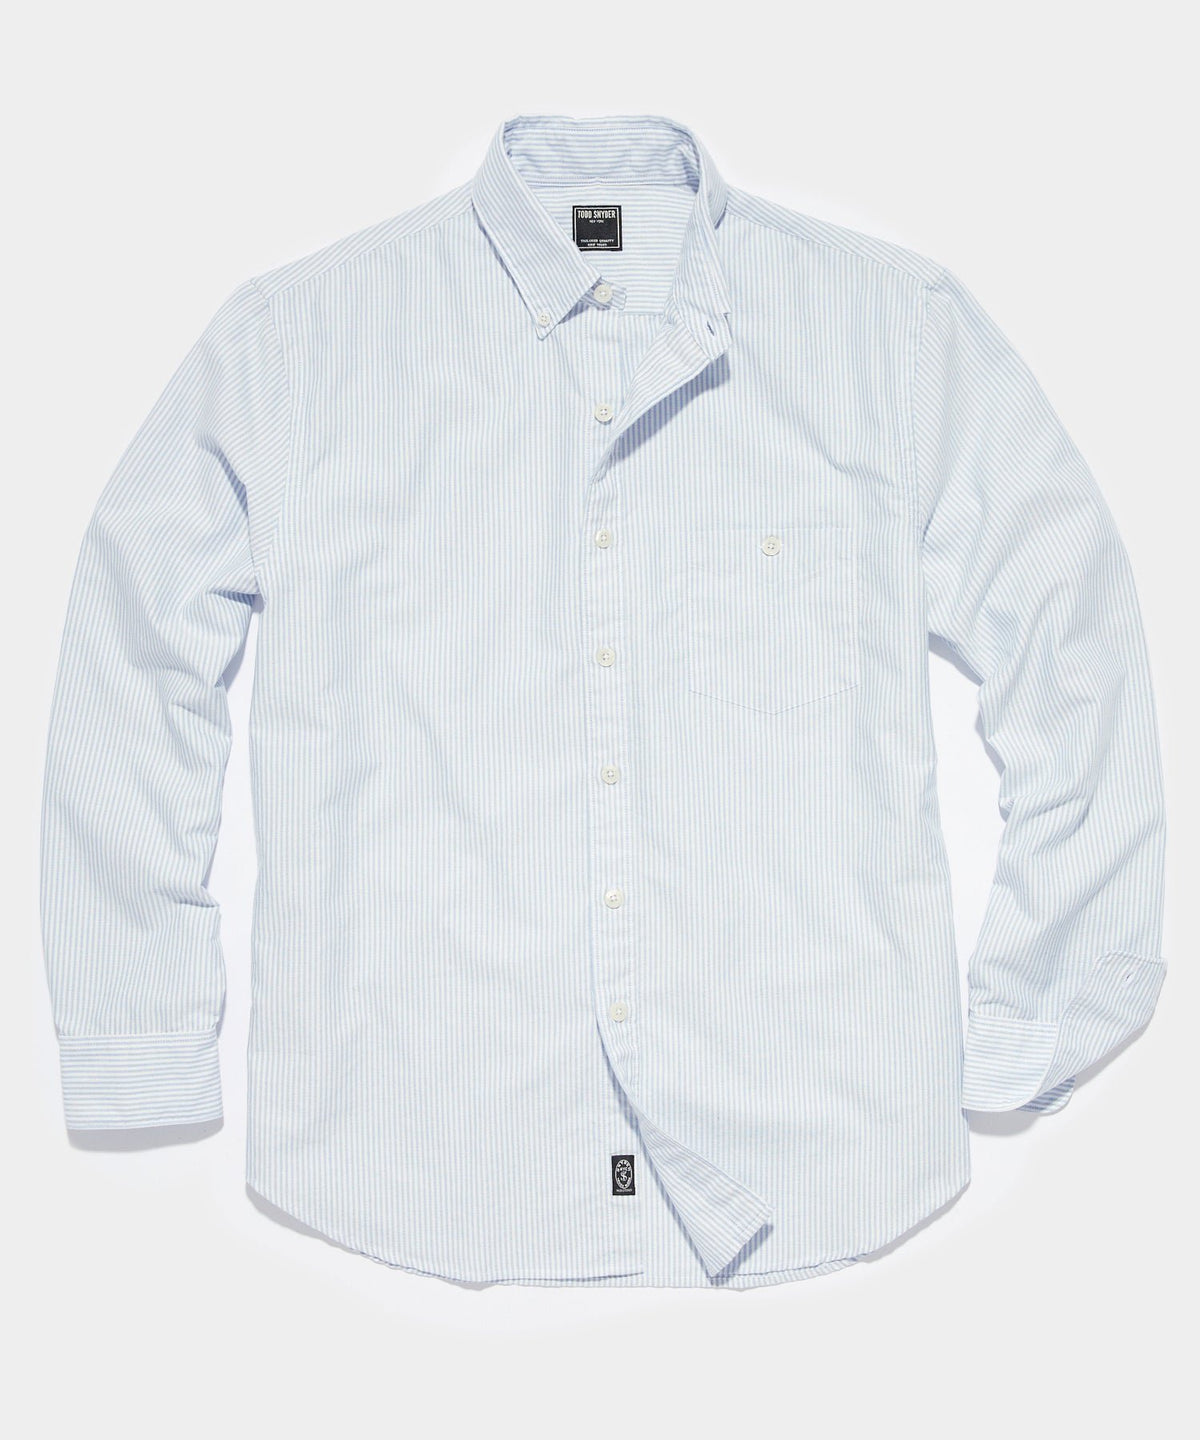 Classic Fit Favorite Oxford Long-Sleeve Shirt in Blue Stripe